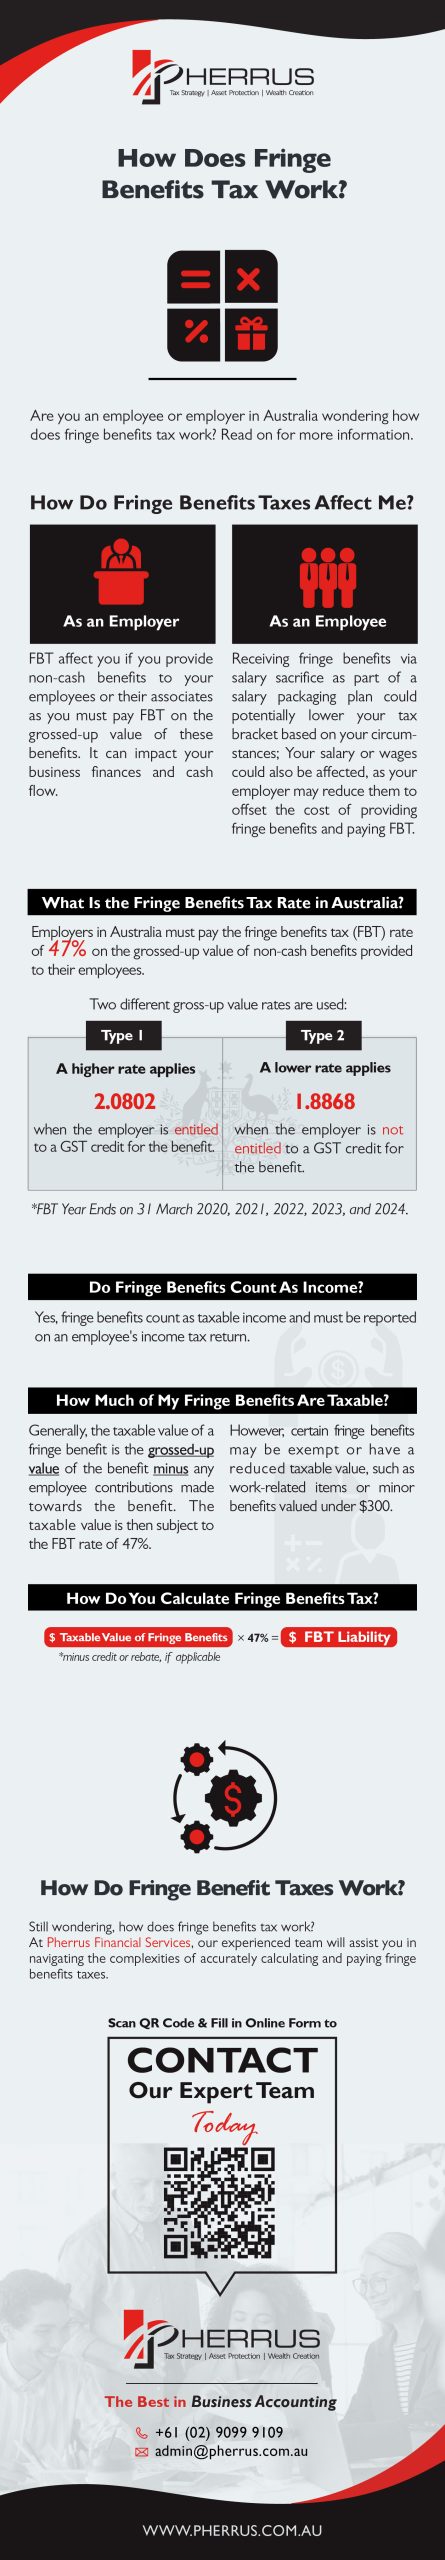 How Does Fringe Benefits Tax Work Infographic